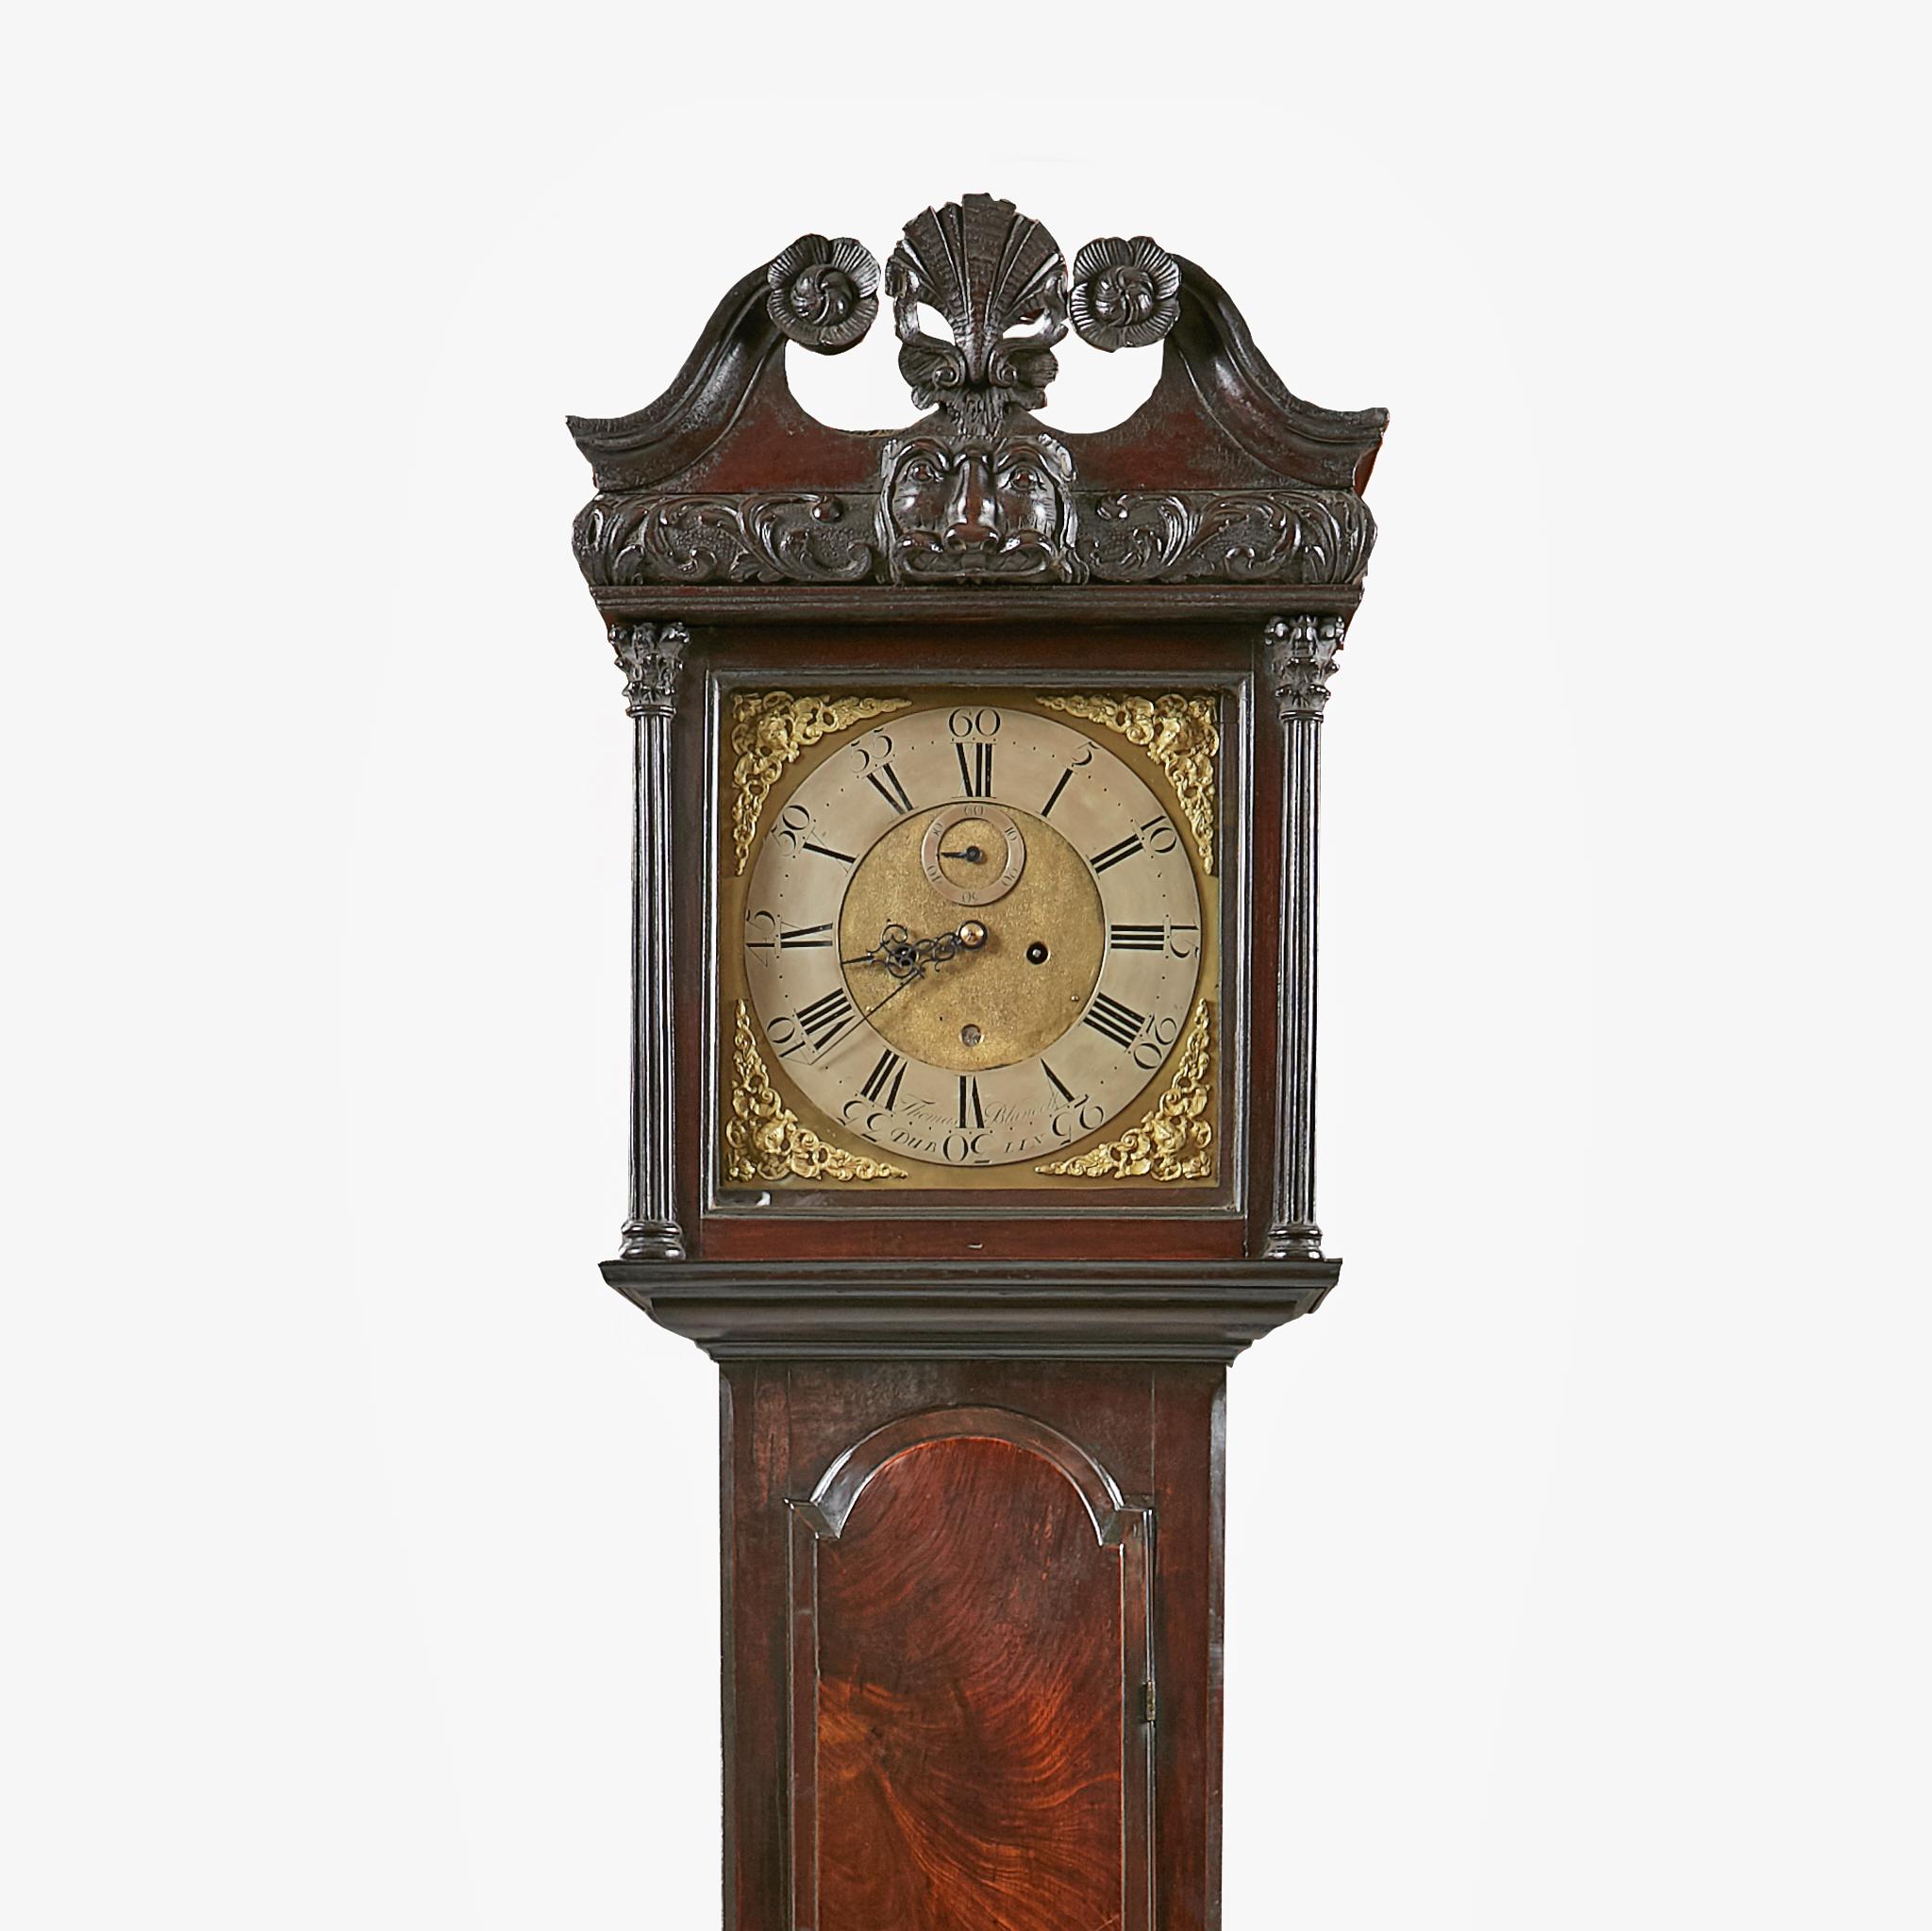 An exceptional 18th century Irish mahogany longcase clock, the brass dial signed 